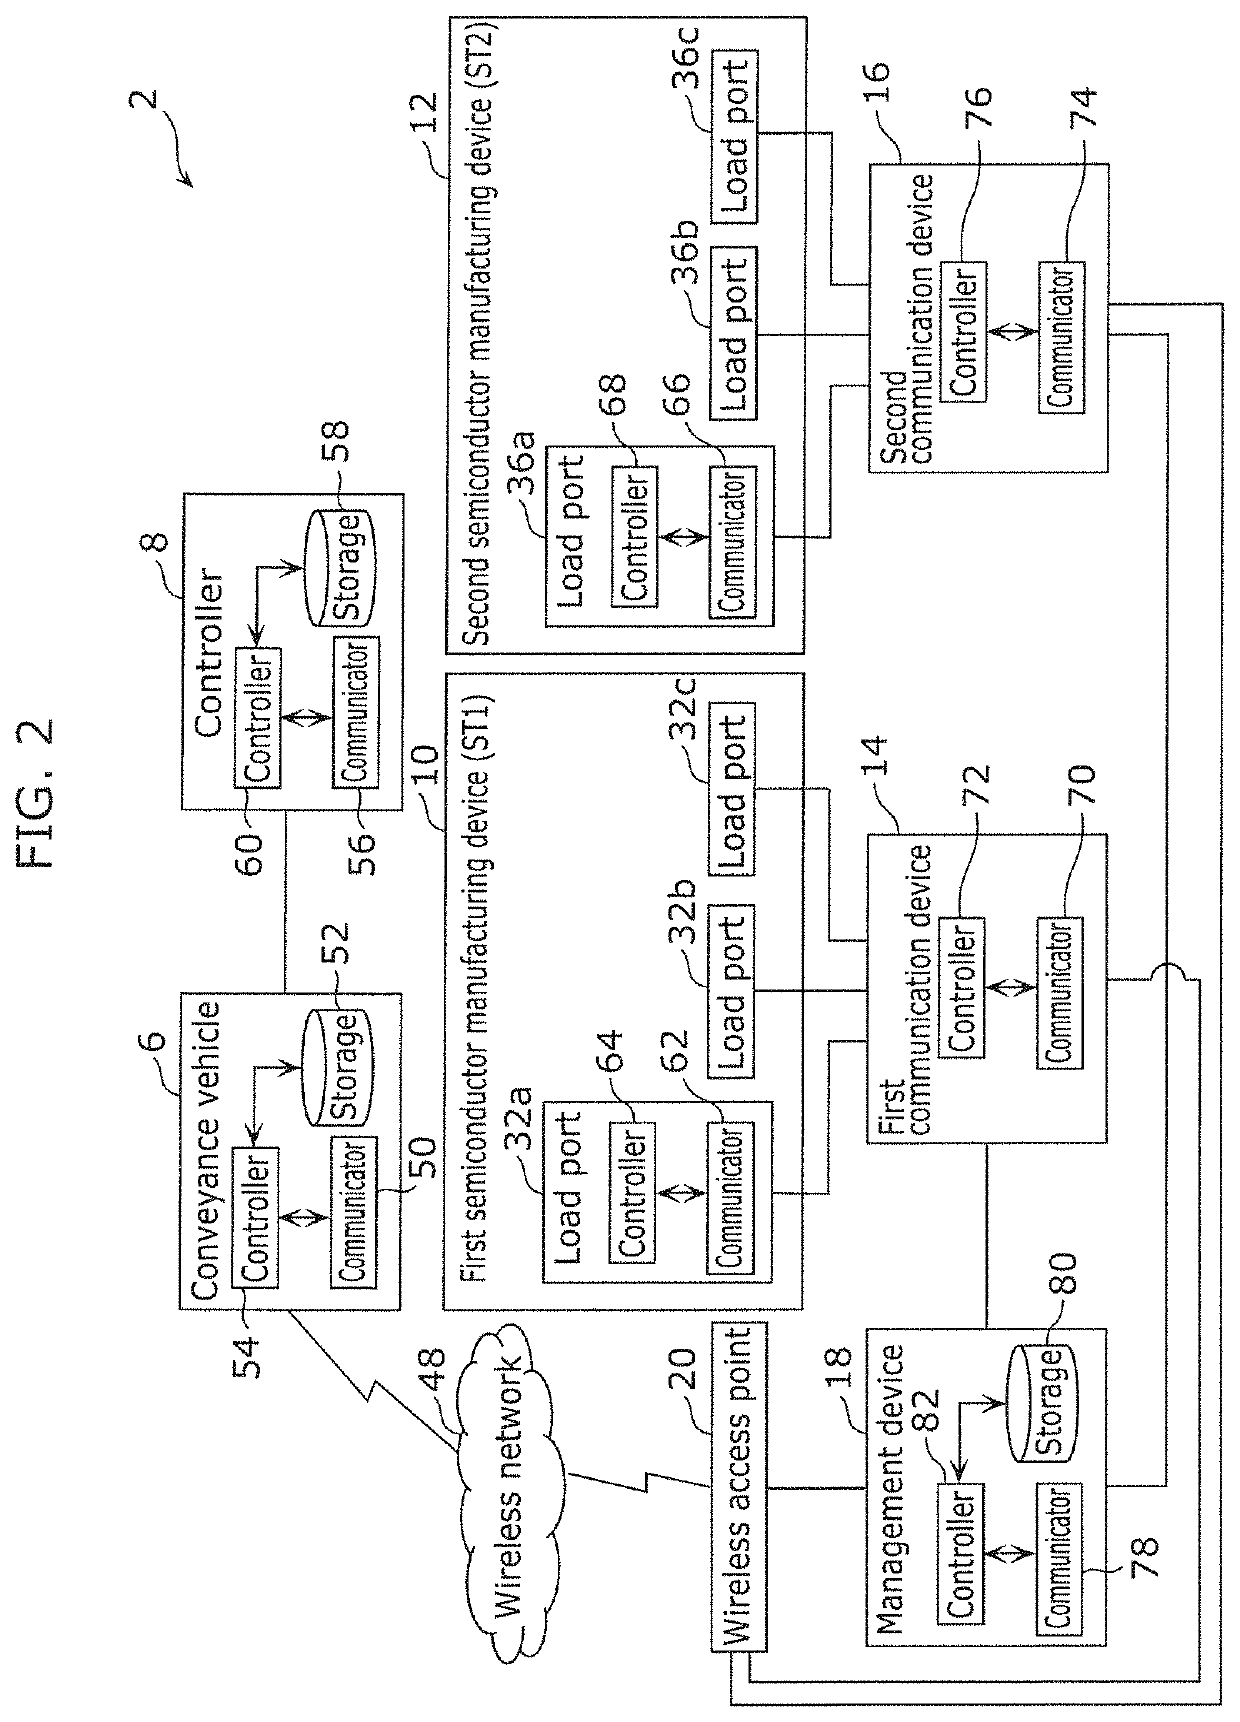 Method for controlling conveyance system, conveyance system, and management device